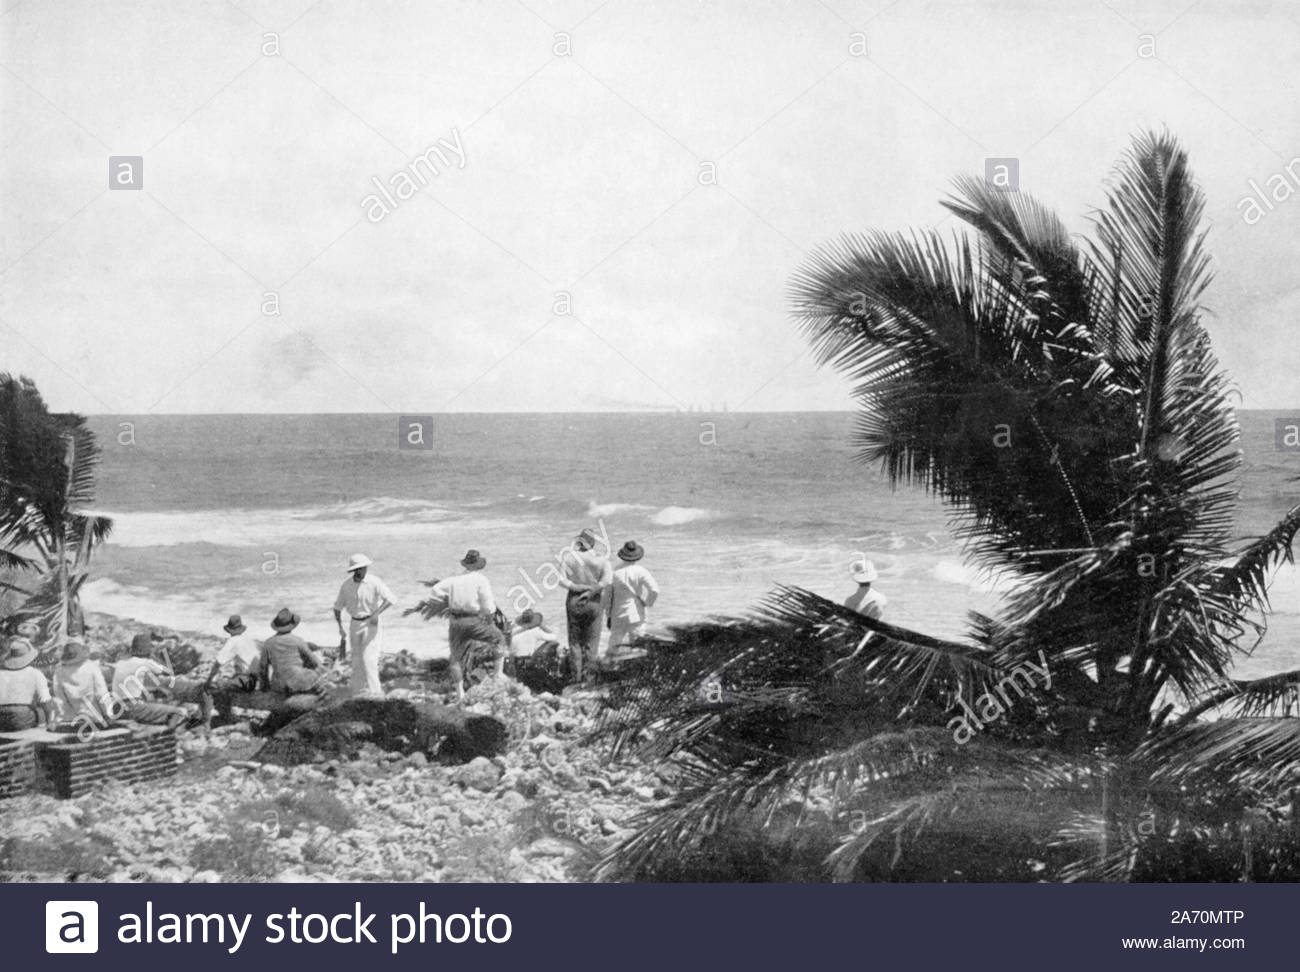 WW1 Watching the German ship SMS Emben and the Australian ship HMAS Sydney from the Cocos Keeling Islands, vintage photograph from 1914 Stock Photo